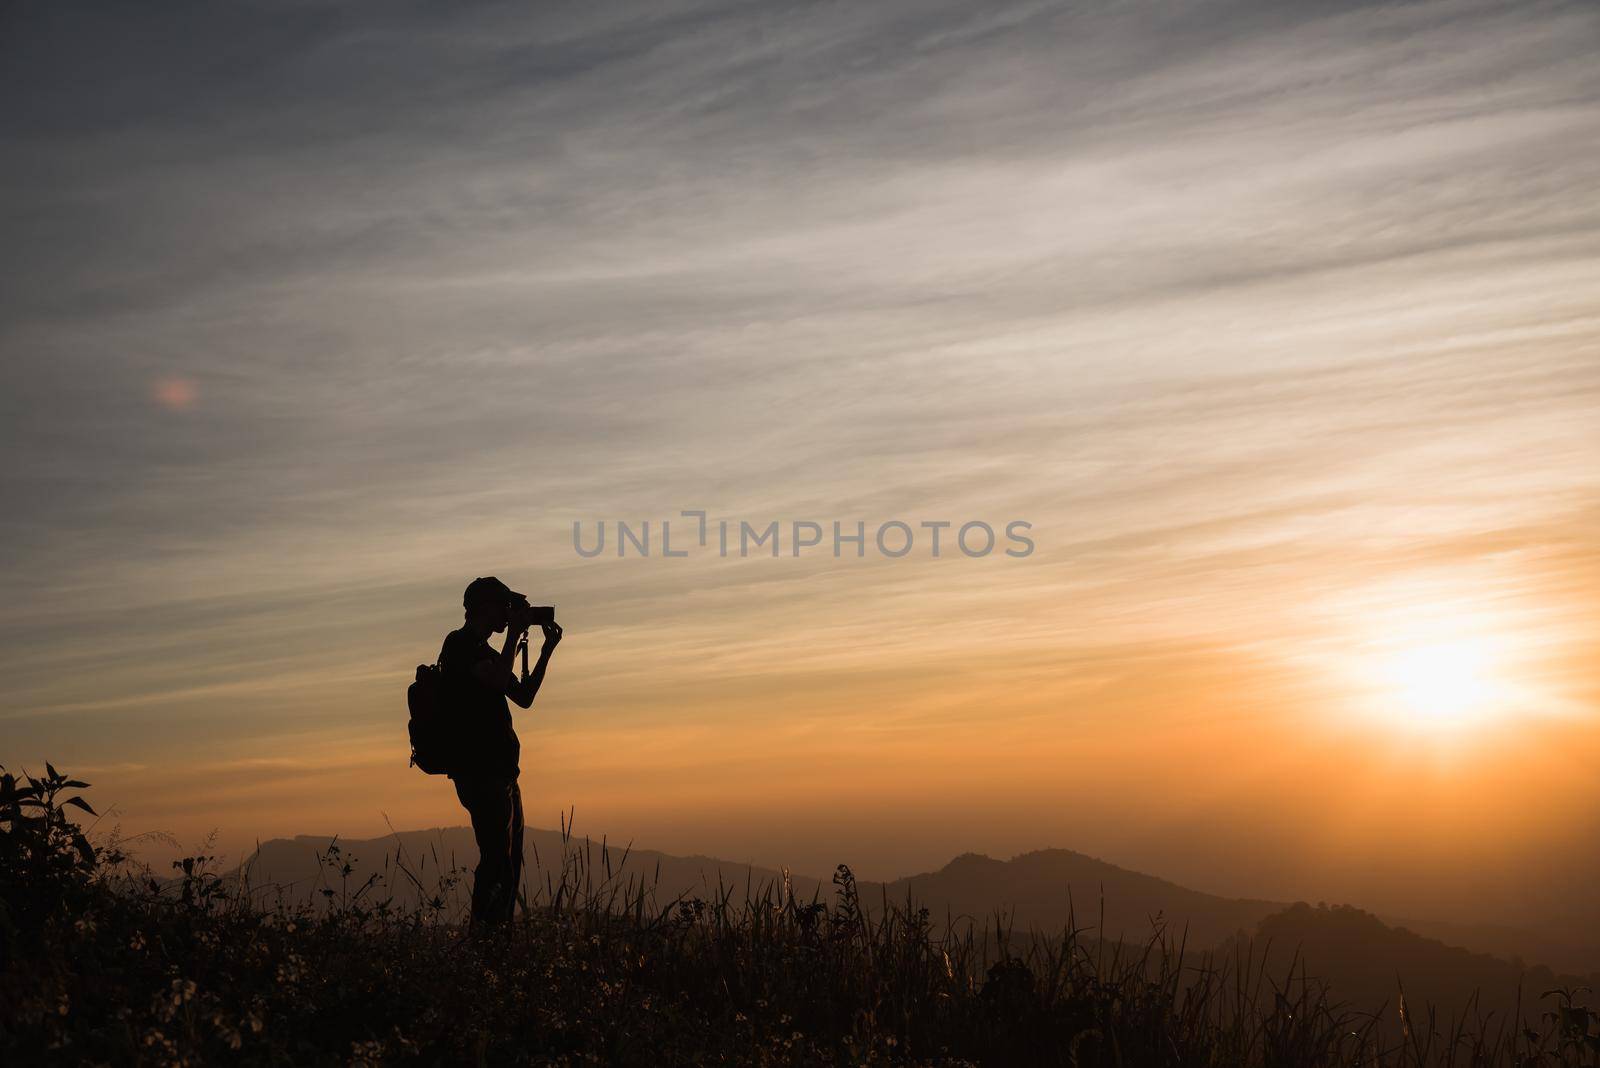 Photographer Silhouettes On Cliff Against Colorful Twilight Sky by Wmpix